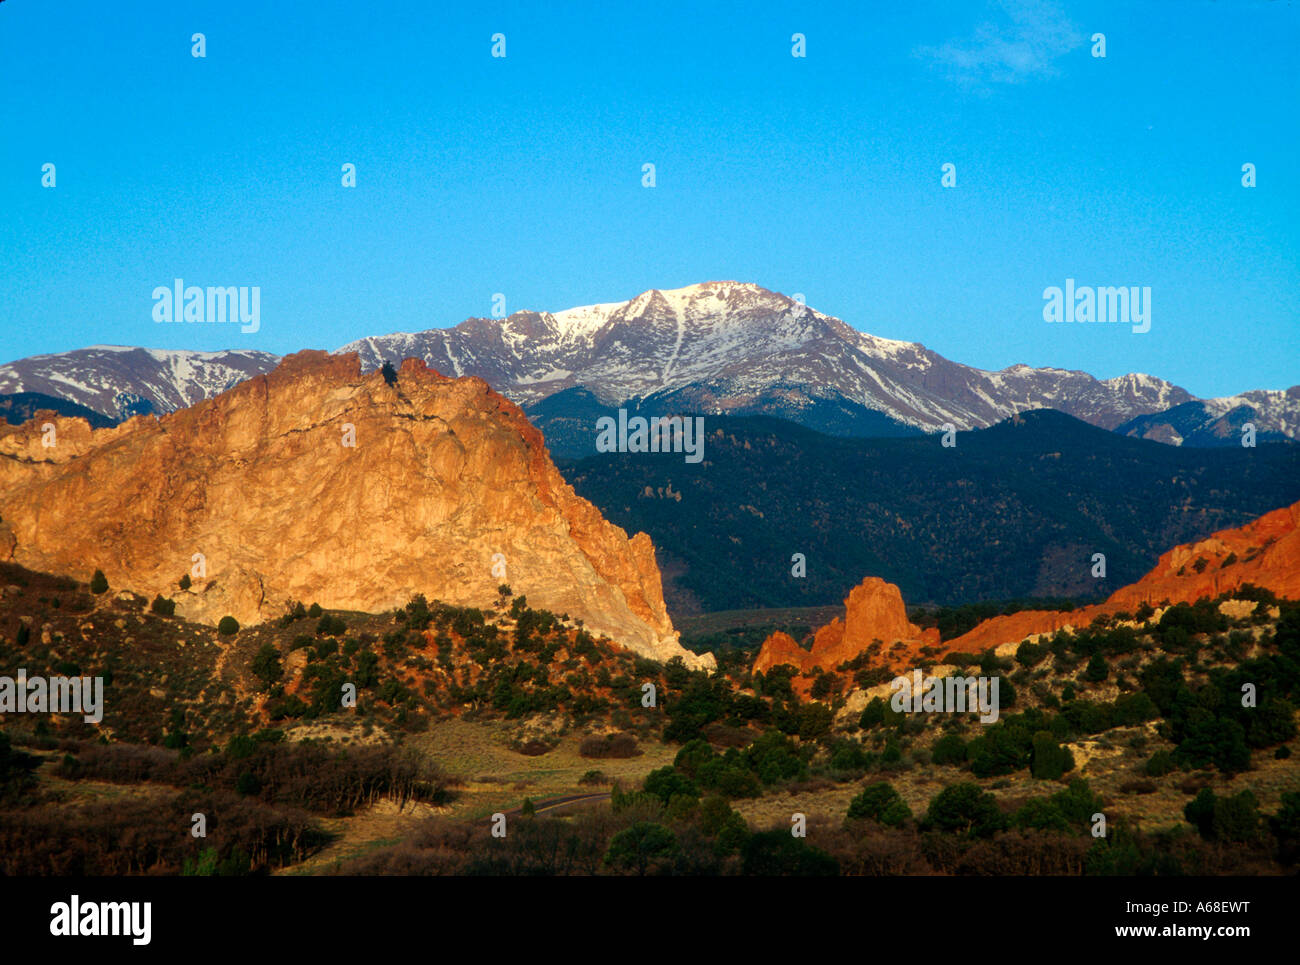 Sedimentary rock formation in the Garden of the Gods Park Colorado with Pikes Peak in distance, Colorado Stock Photo